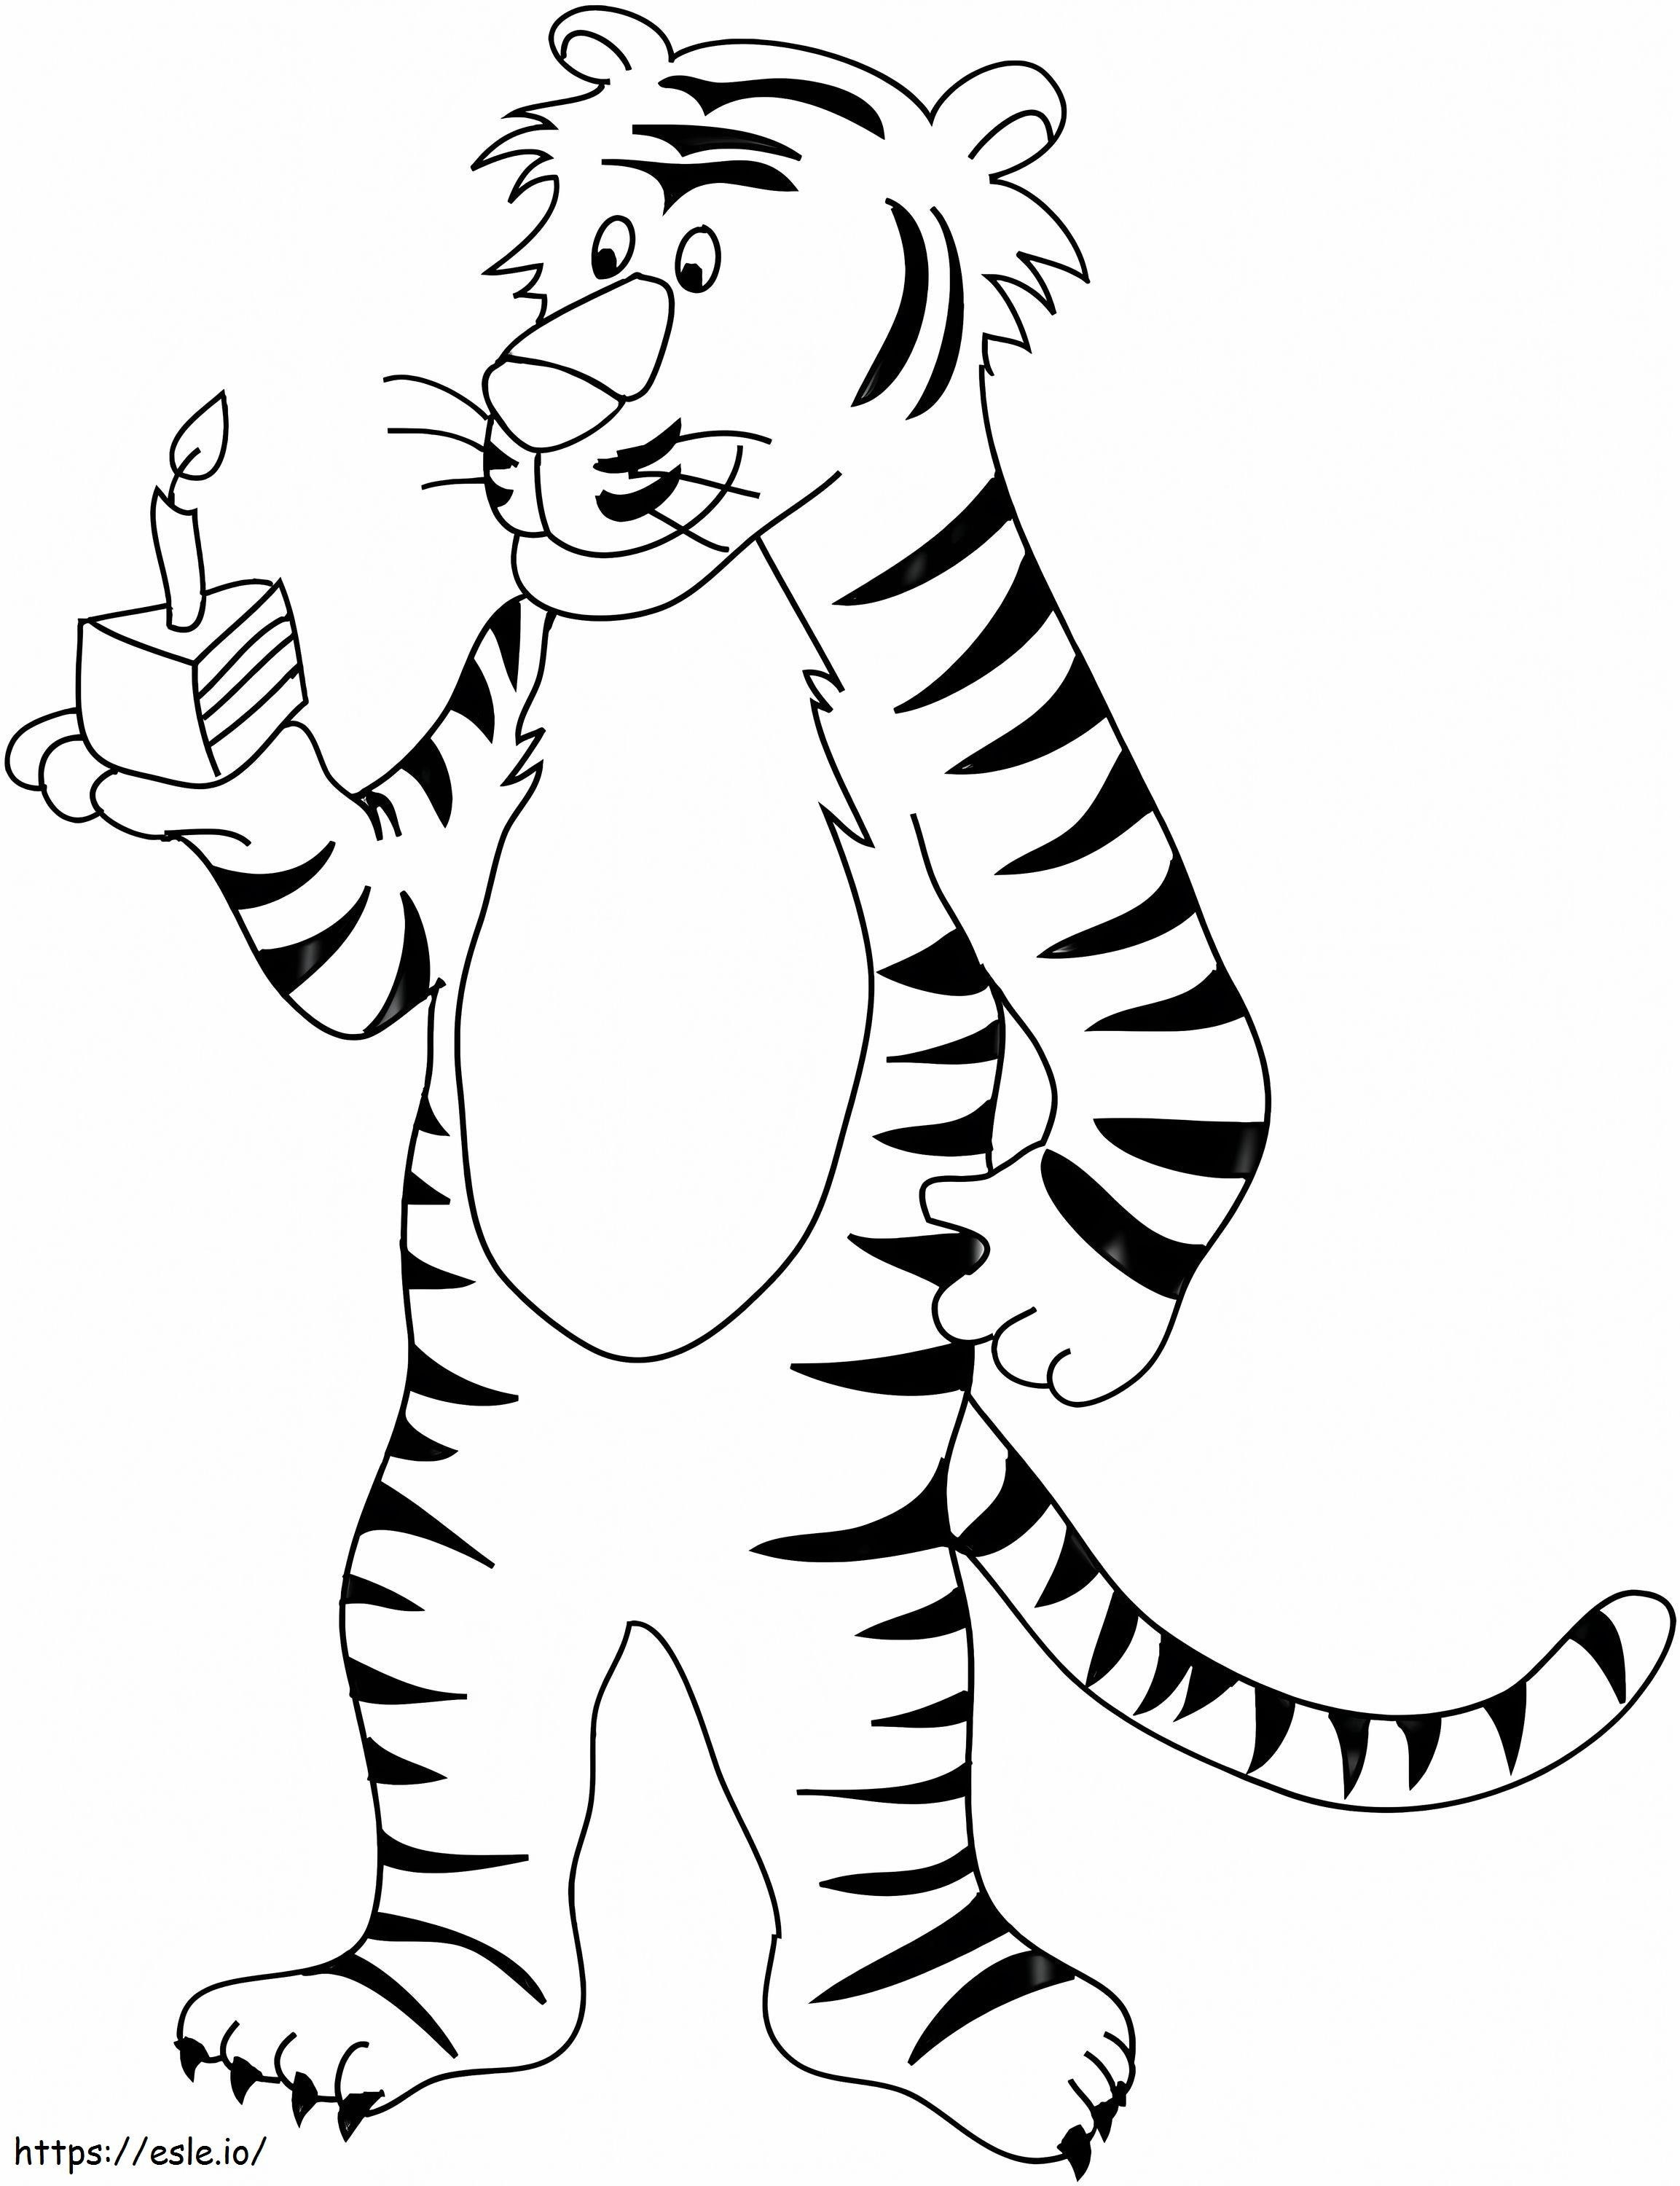 Tiger With Cake coloring page